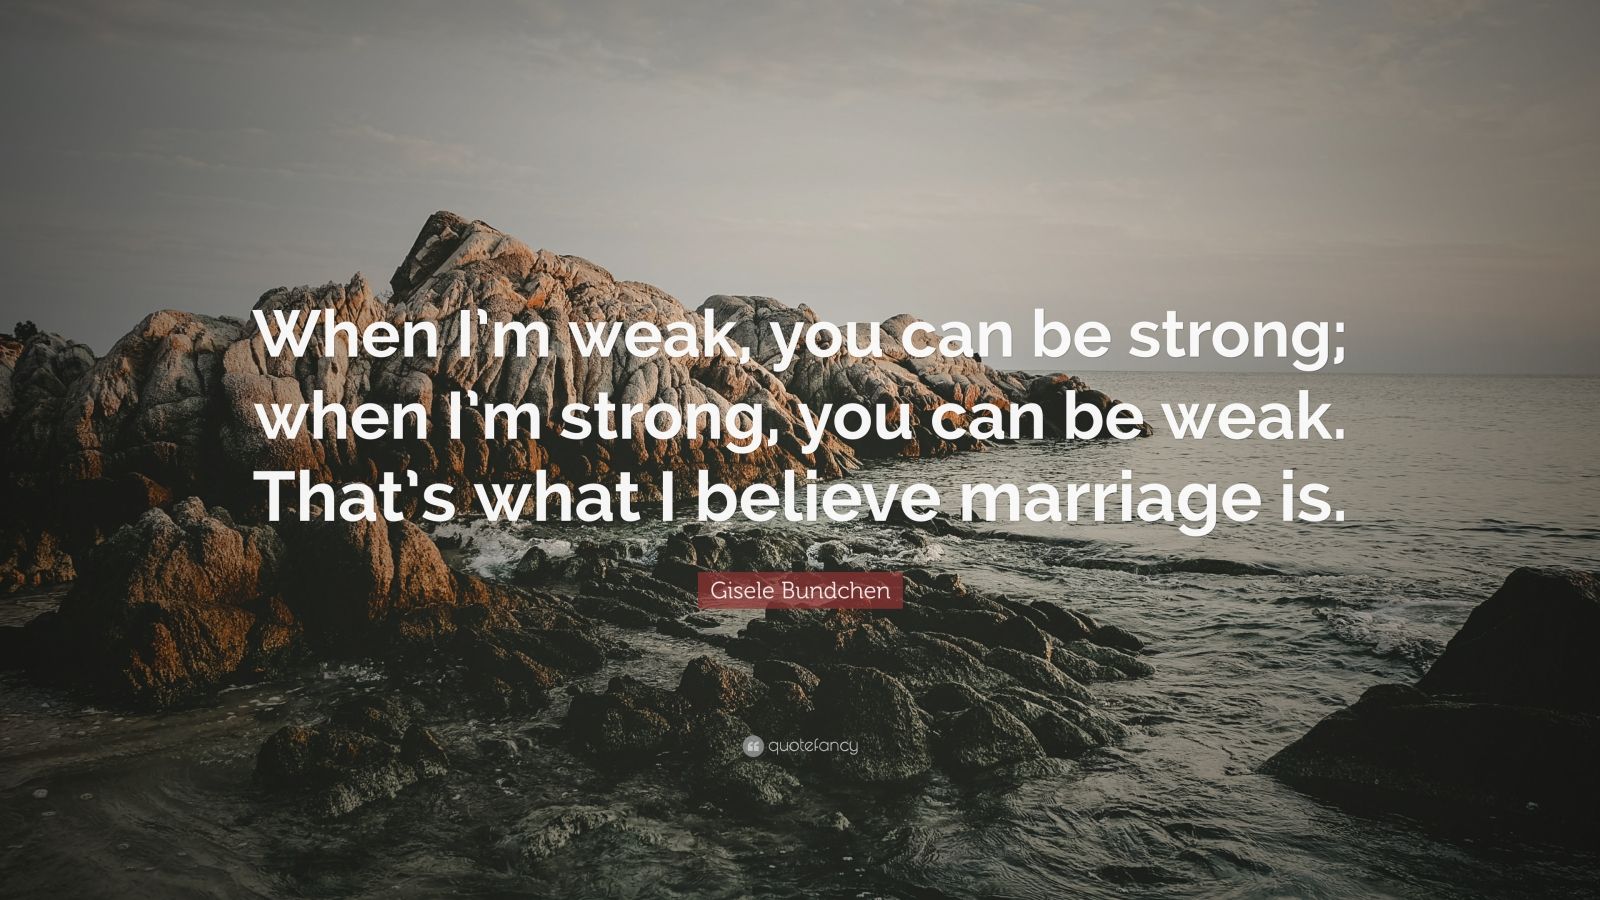 Gisele Bundchen Quote: “When I’m weak, you can be strong; when I’m ...